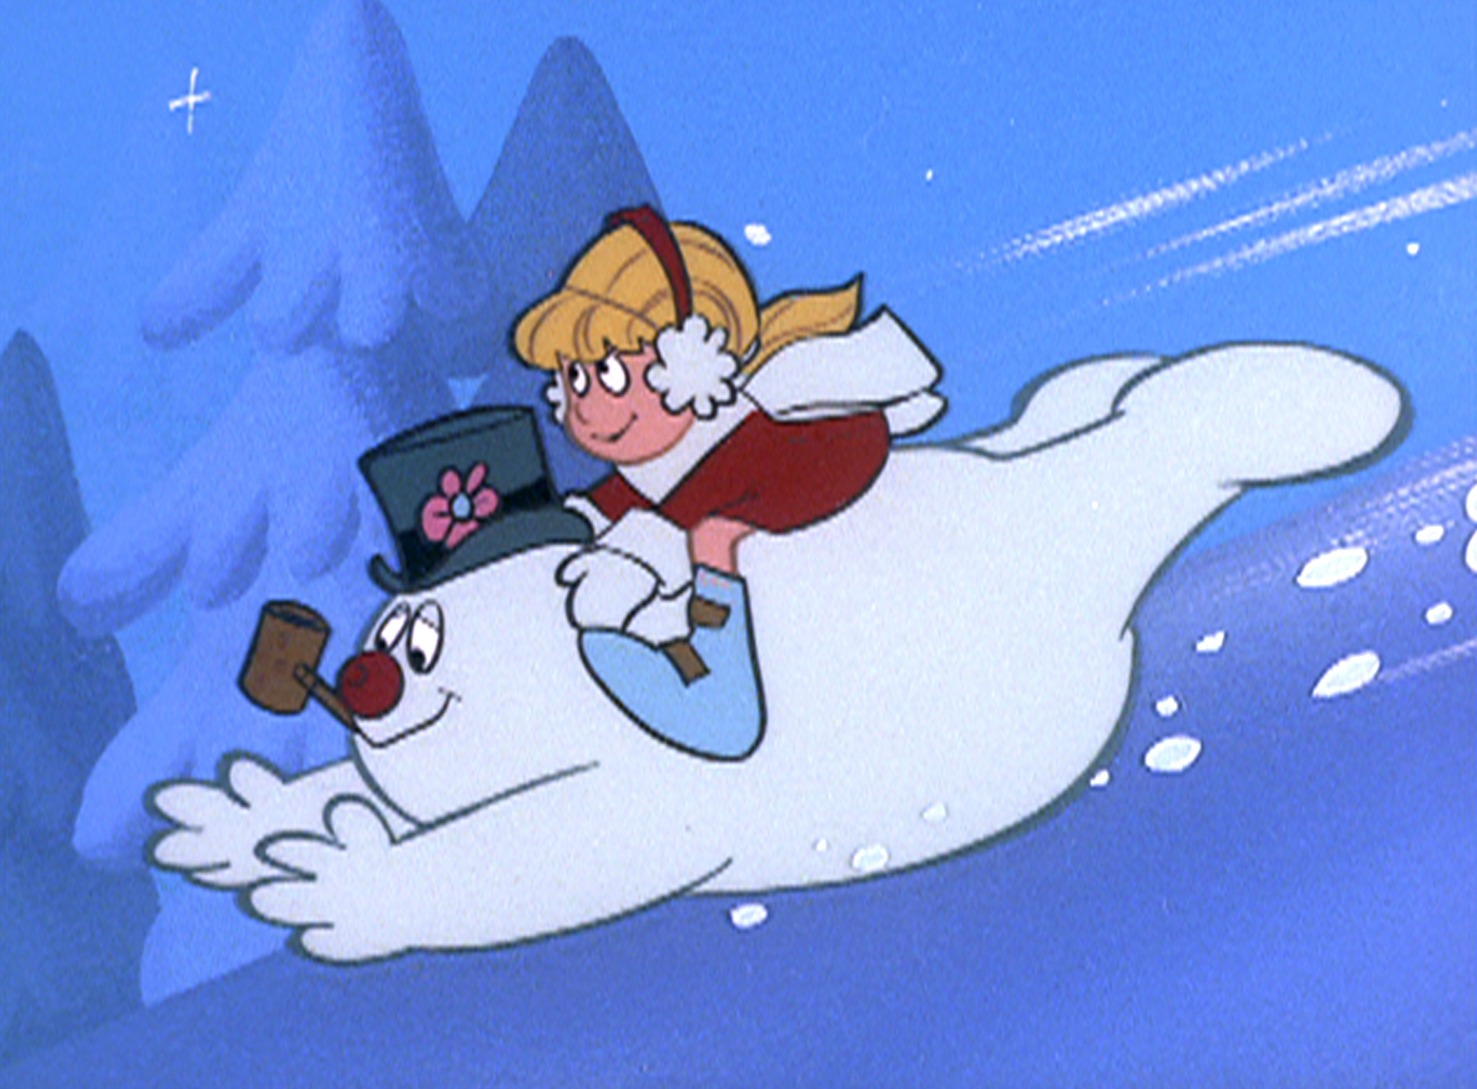 FROSTY THE SNOWMAN (1969)